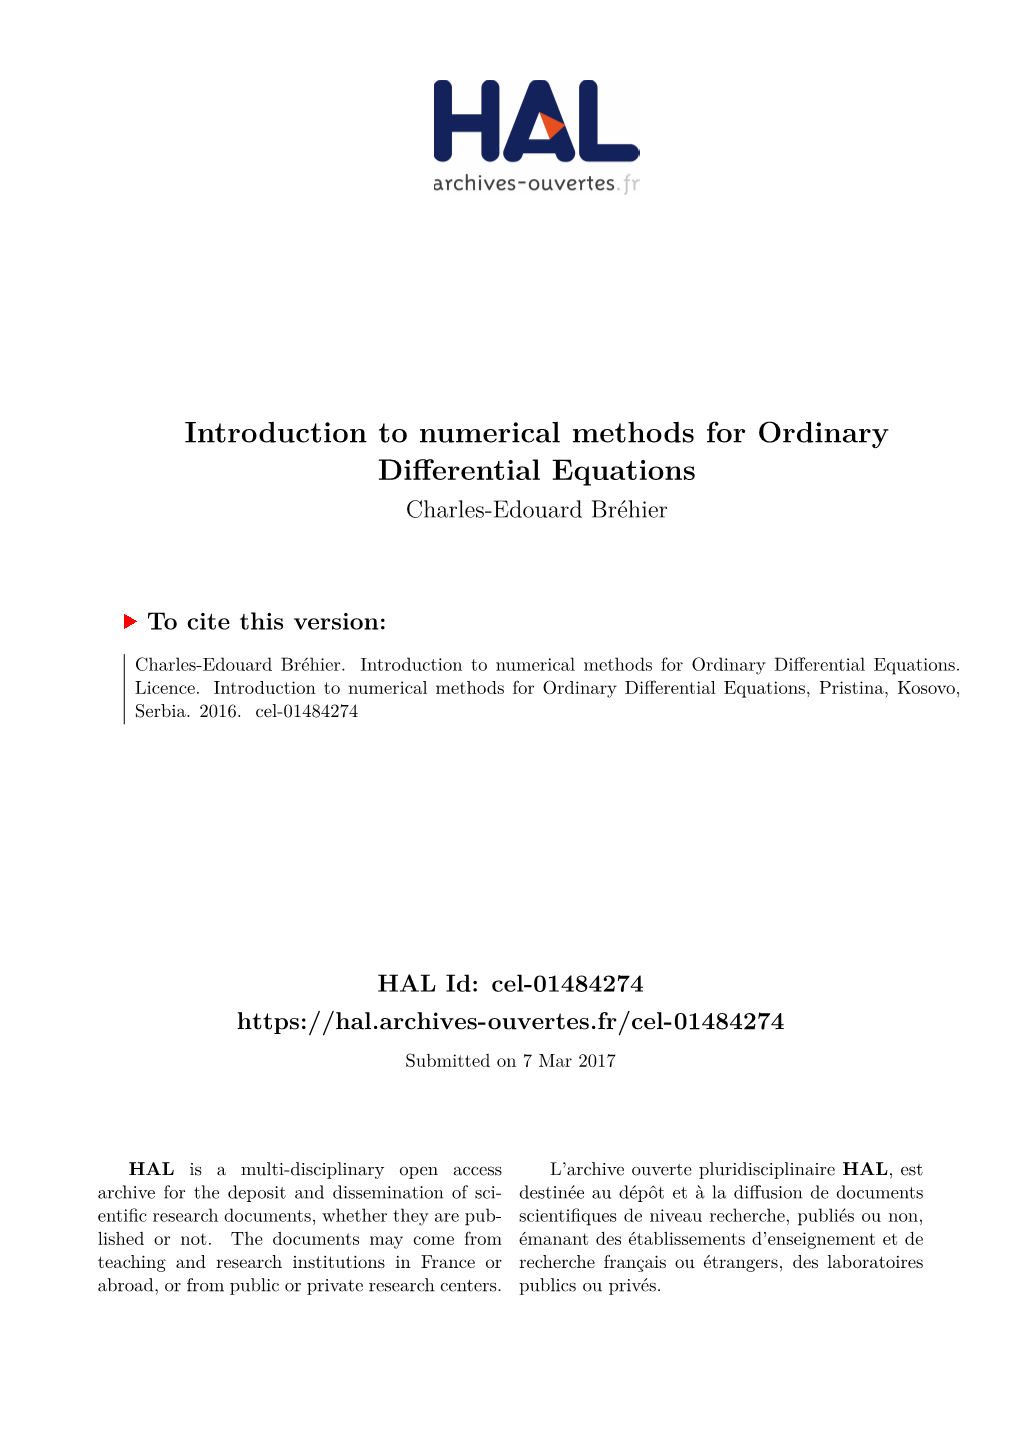 Introduction to Numerical Methods for Ordinary Differential Equations Charles-Edouard Bréhier